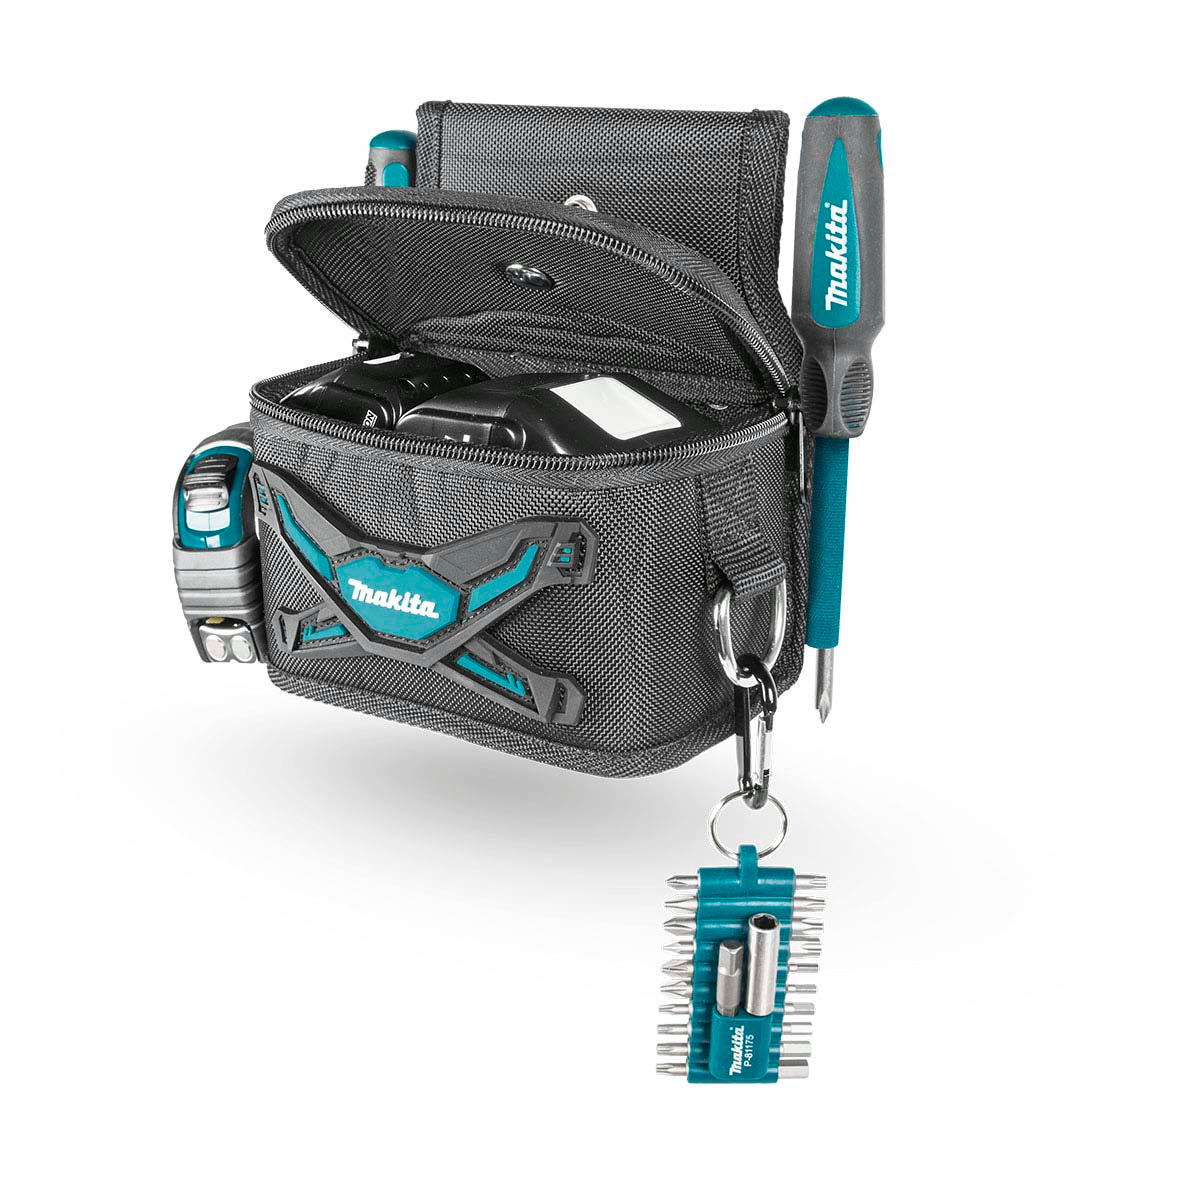 Zip Top Pouch - Dual Battery or Fixings E-05206 by Makita